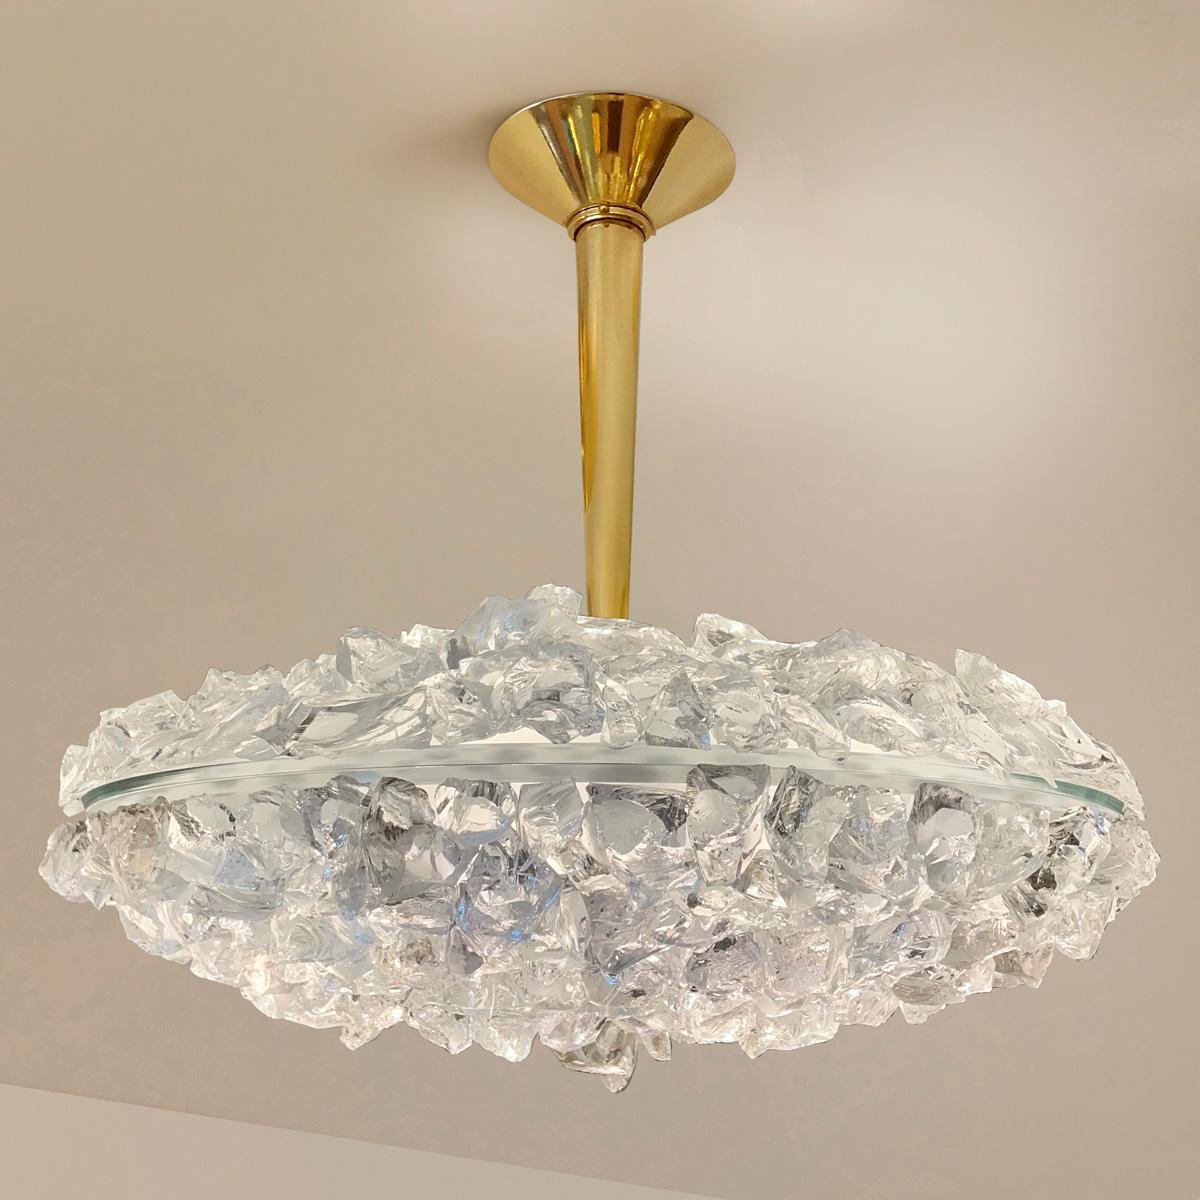 The focal point of the Matera Grande ceiling light is the sculptural glass shade composed of dozens of hand applied crystal elements. Its clean and modern stem and canopy, create a balanced contrast to the organic feel of the rest of the piece. Can